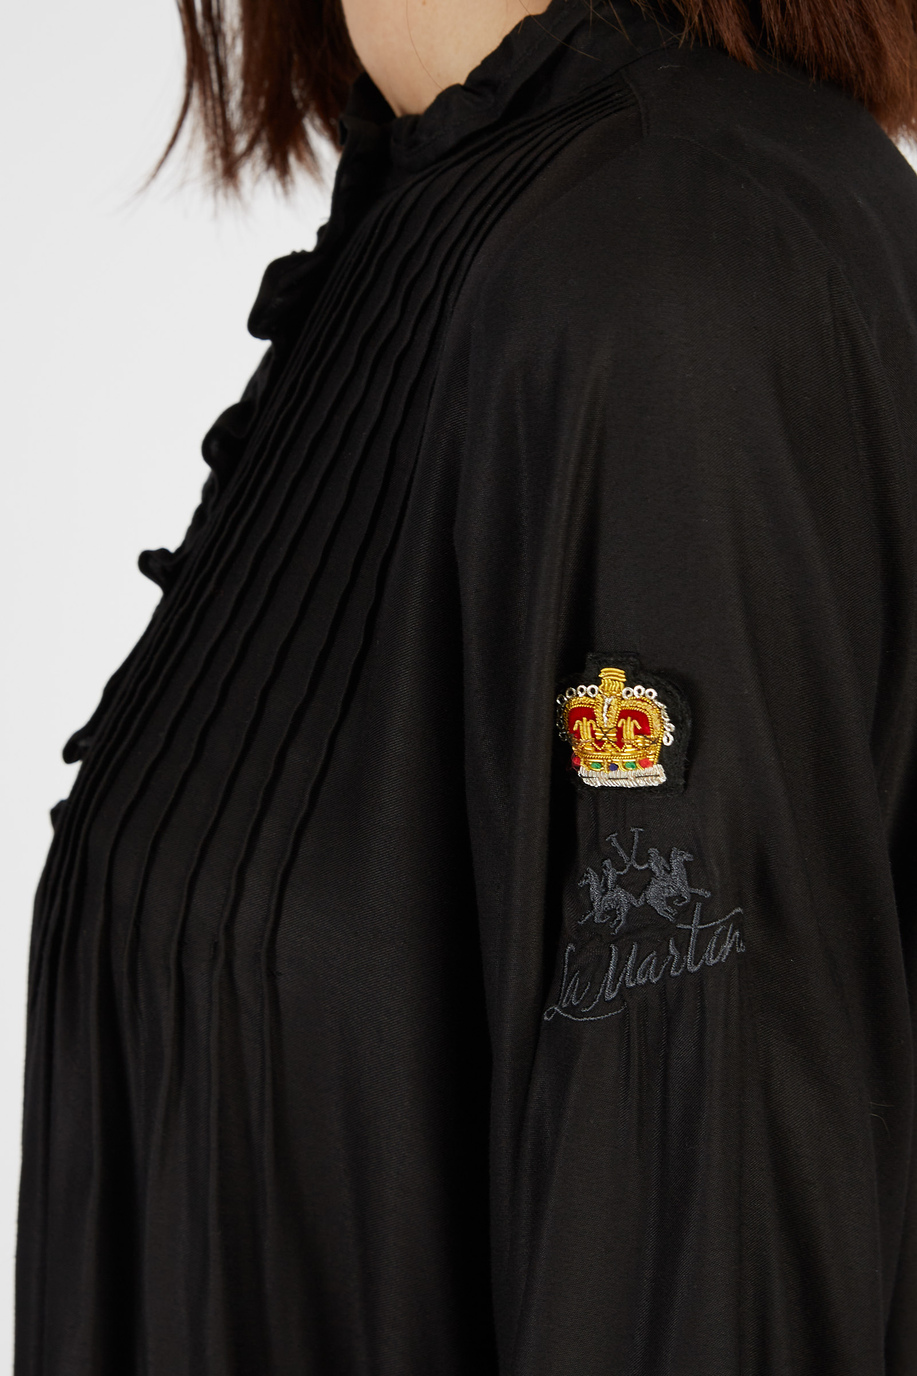 Dress long sleeves England solid color - Party season for her | La Martina - Official Online Shop